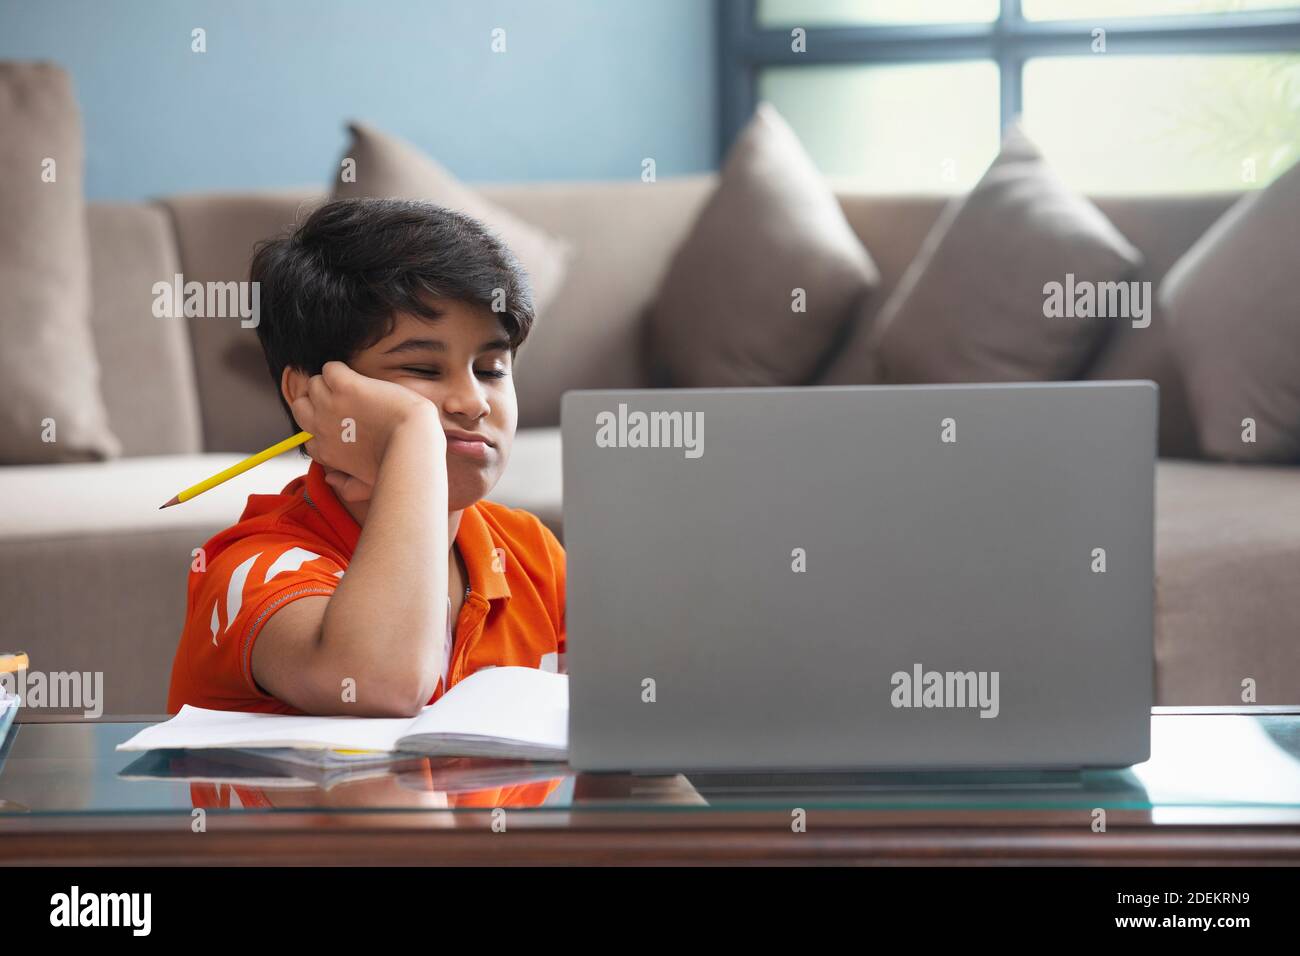 A YOUNG SCHOOL KID FEELING SLEEPY DURING ONLINE CLASS Stock Photo